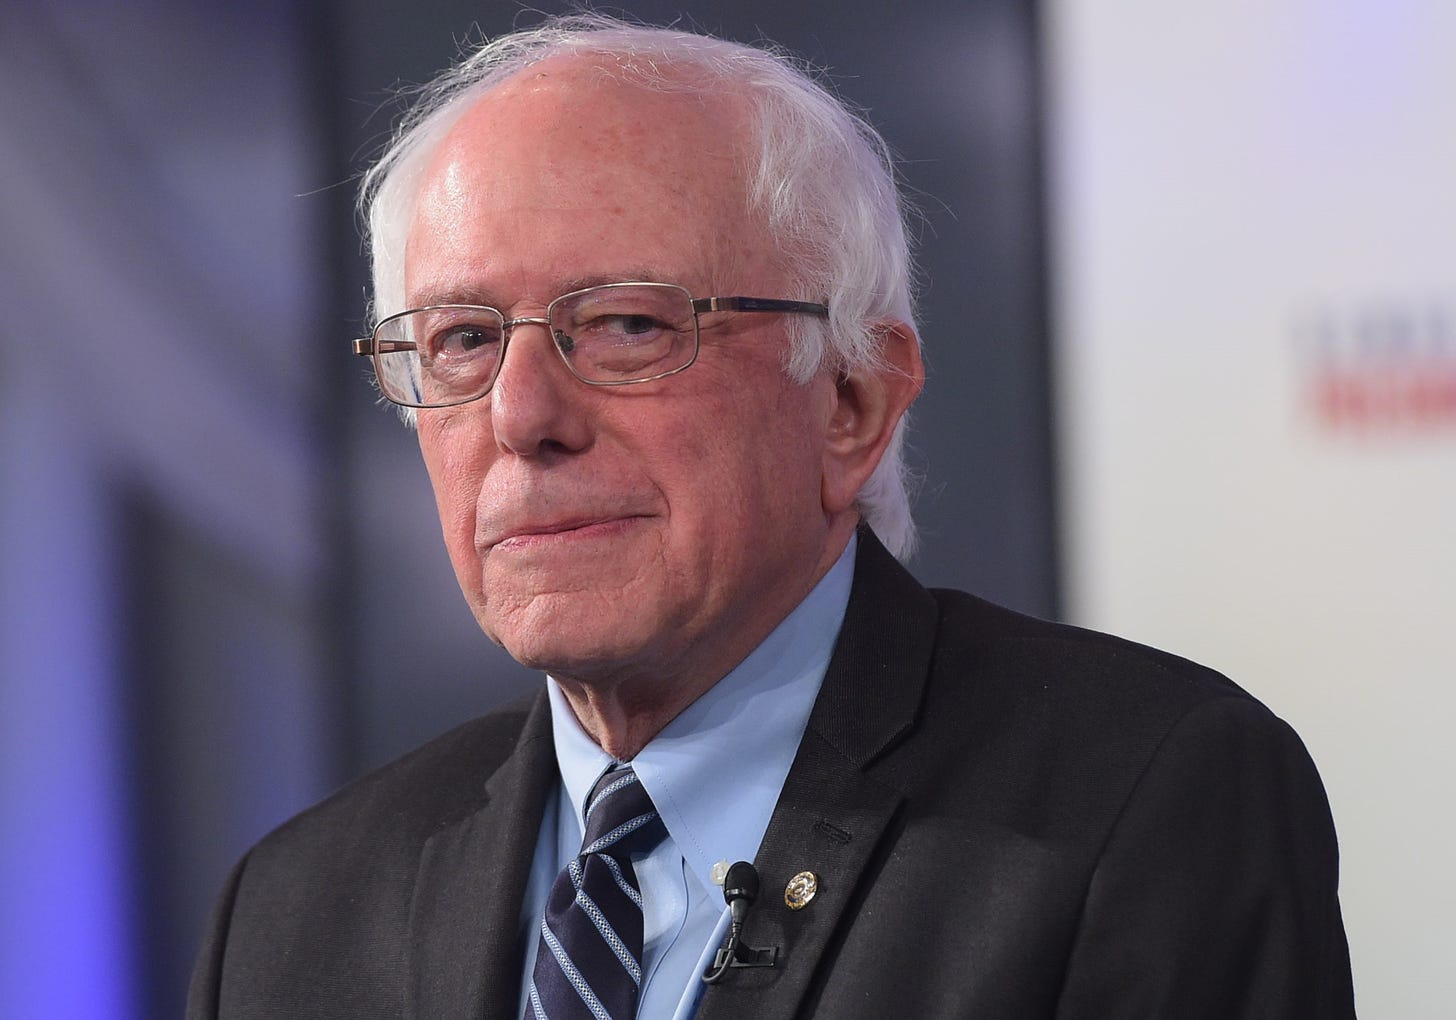 6 Startling Bernie Sanders Look-Alikes Who Will Make You Do A Double Take